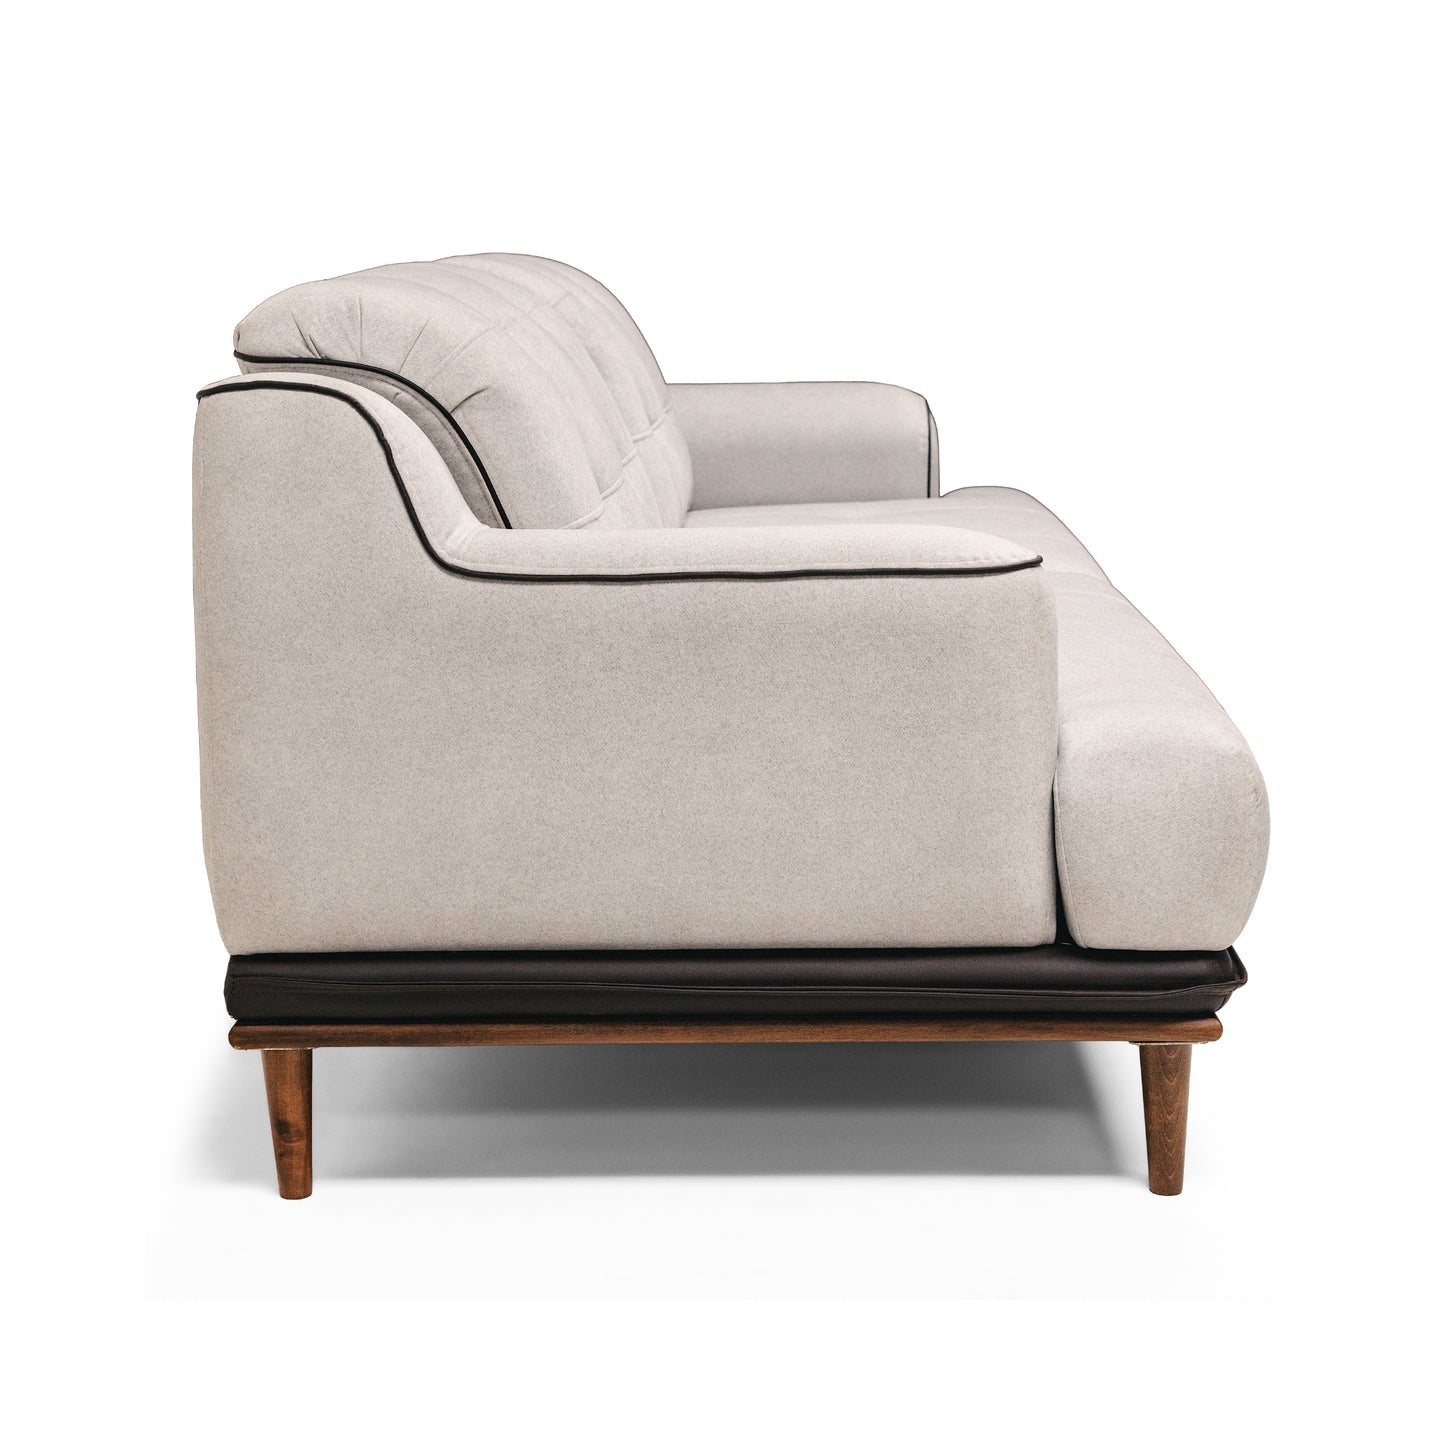 The Ridley Large Sofa